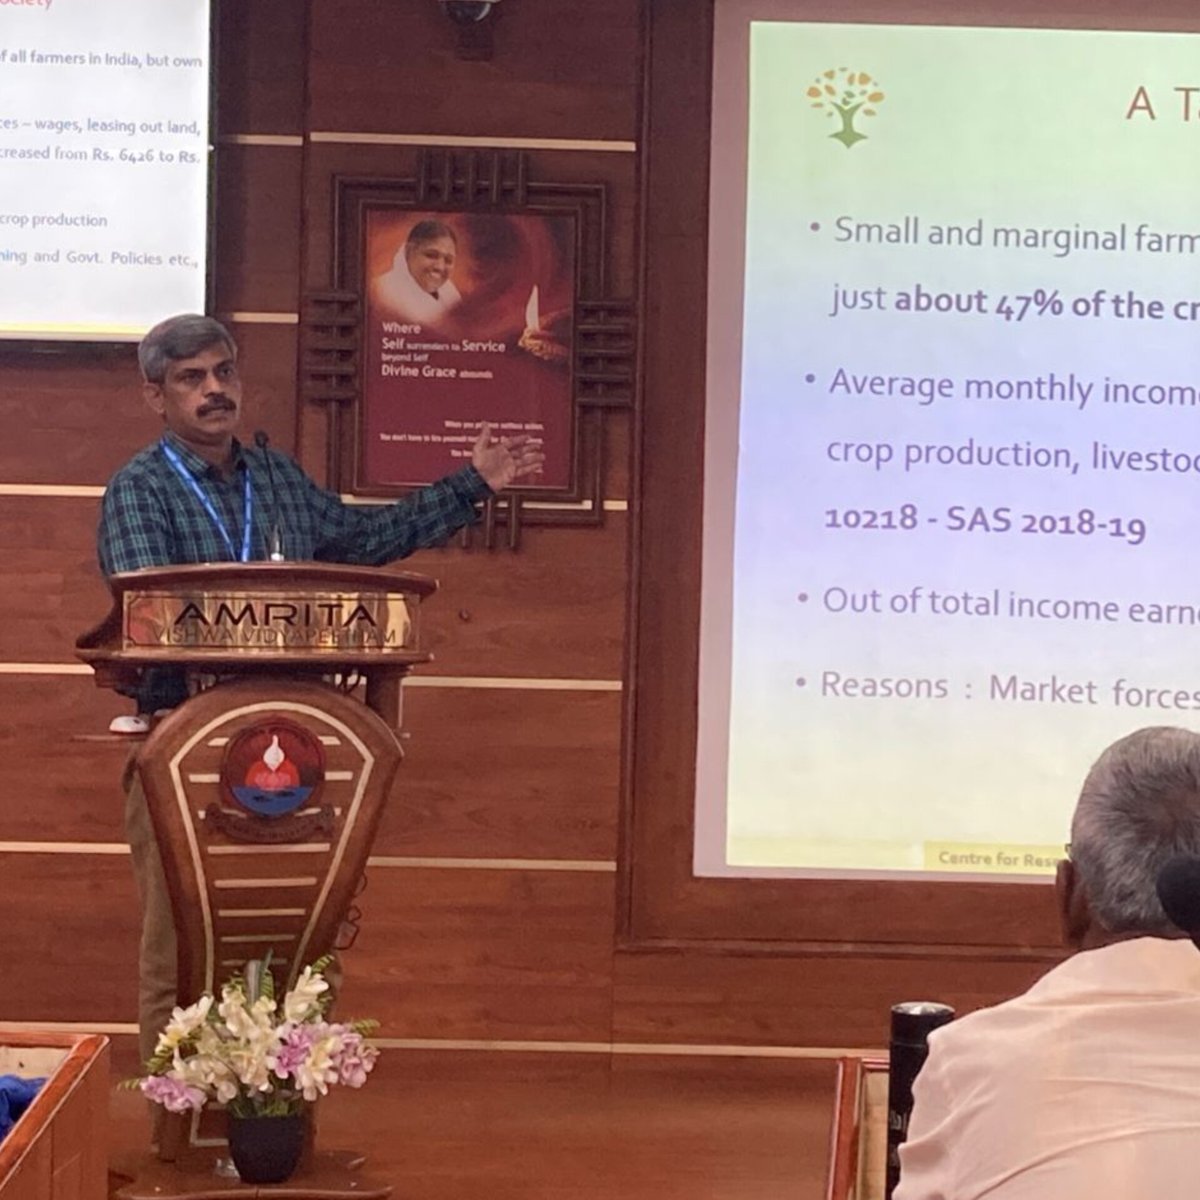 Delivered   talk on digi gadgets for small holders during the Indo French workshop 15-17 th Mar,2024  The event brought better insights and expects to bring iinter disciplinary collaborations.Greatful to Dr amit and CEFIPRA @AmritaUniversty @IFCPAR @amrita_of @AMRITAedu